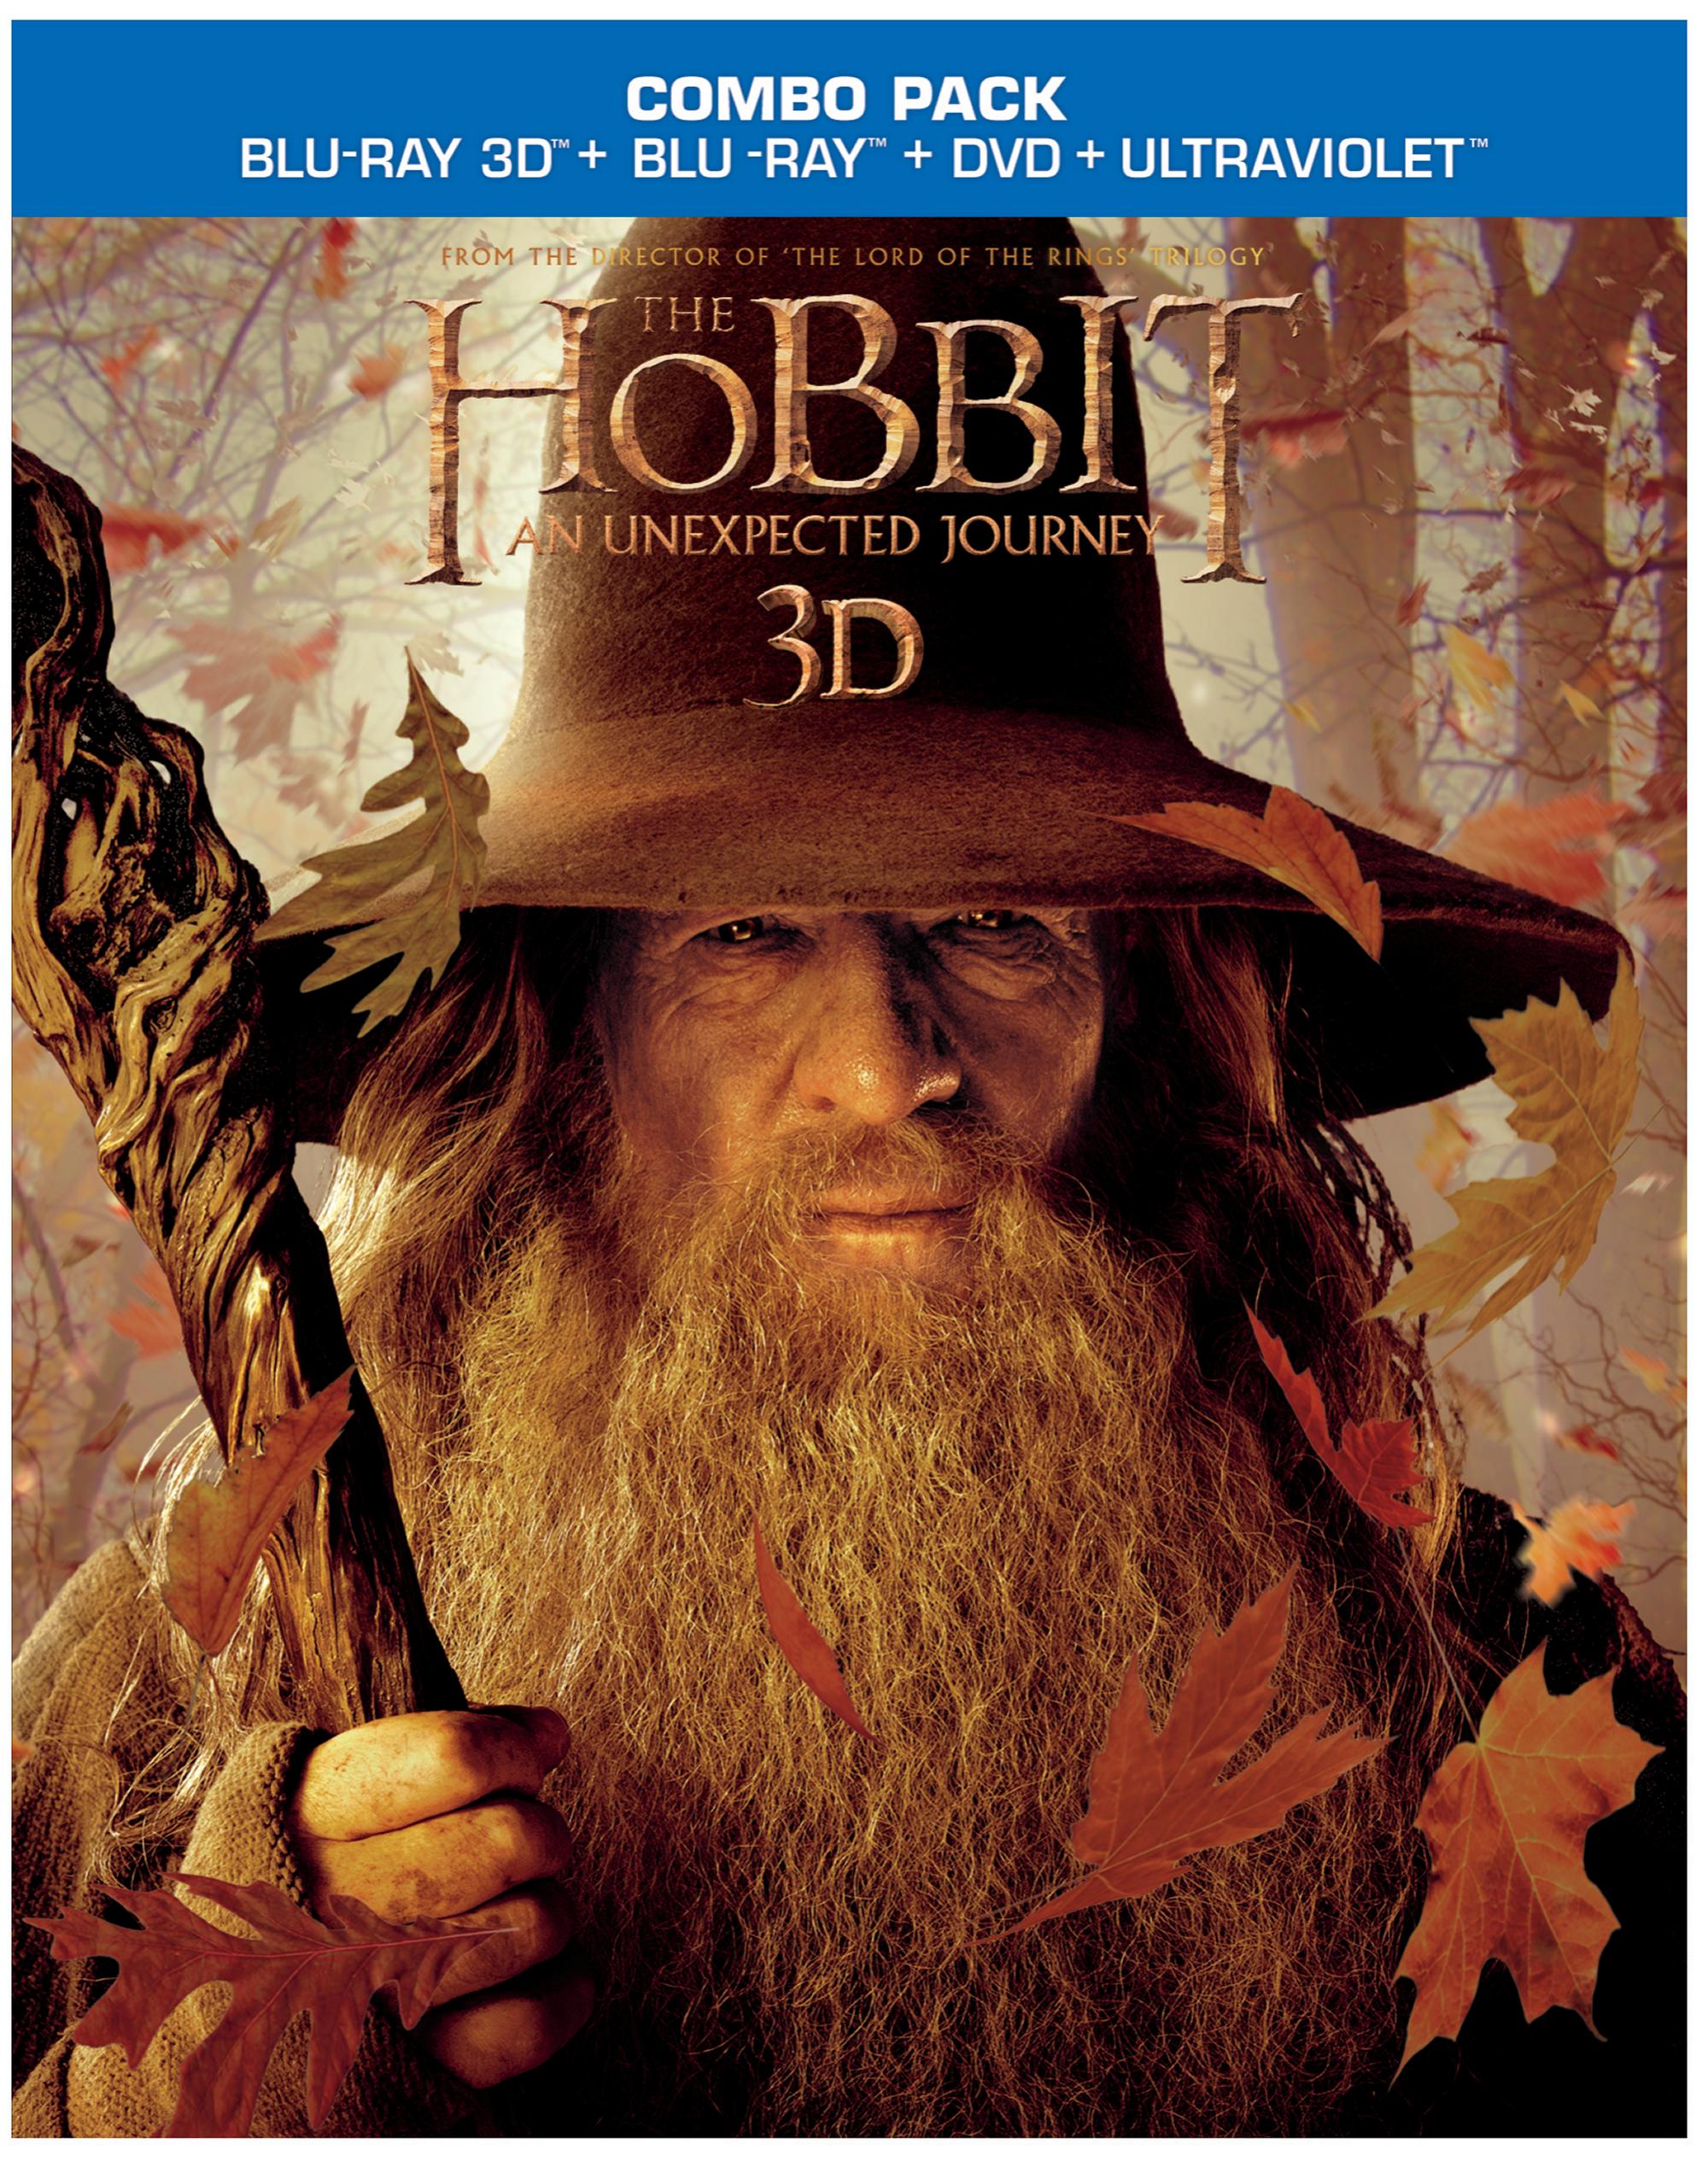 The Hobbit: An Unexpected Journey bluray